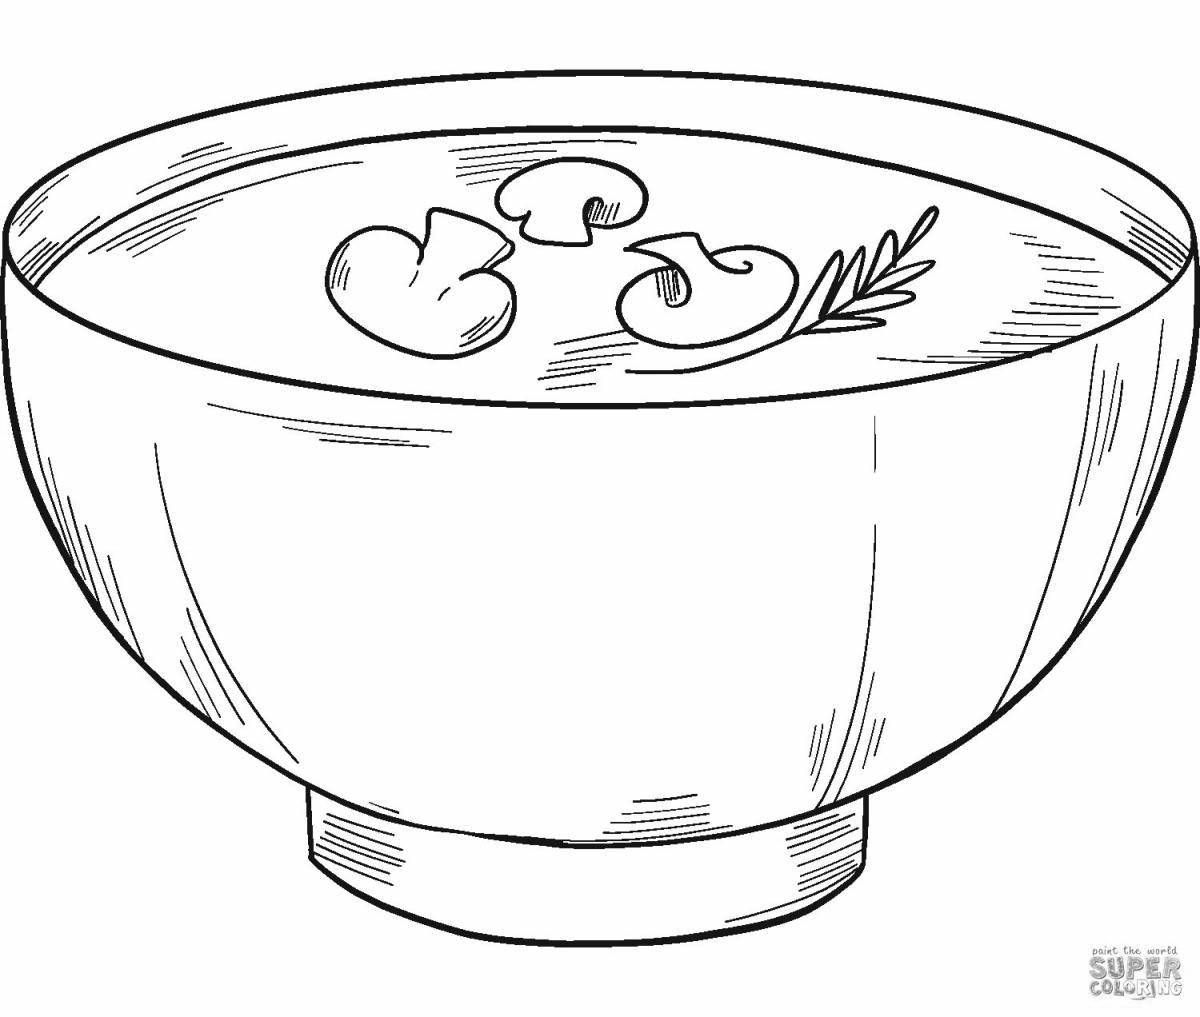 Exciting bowl coloring page